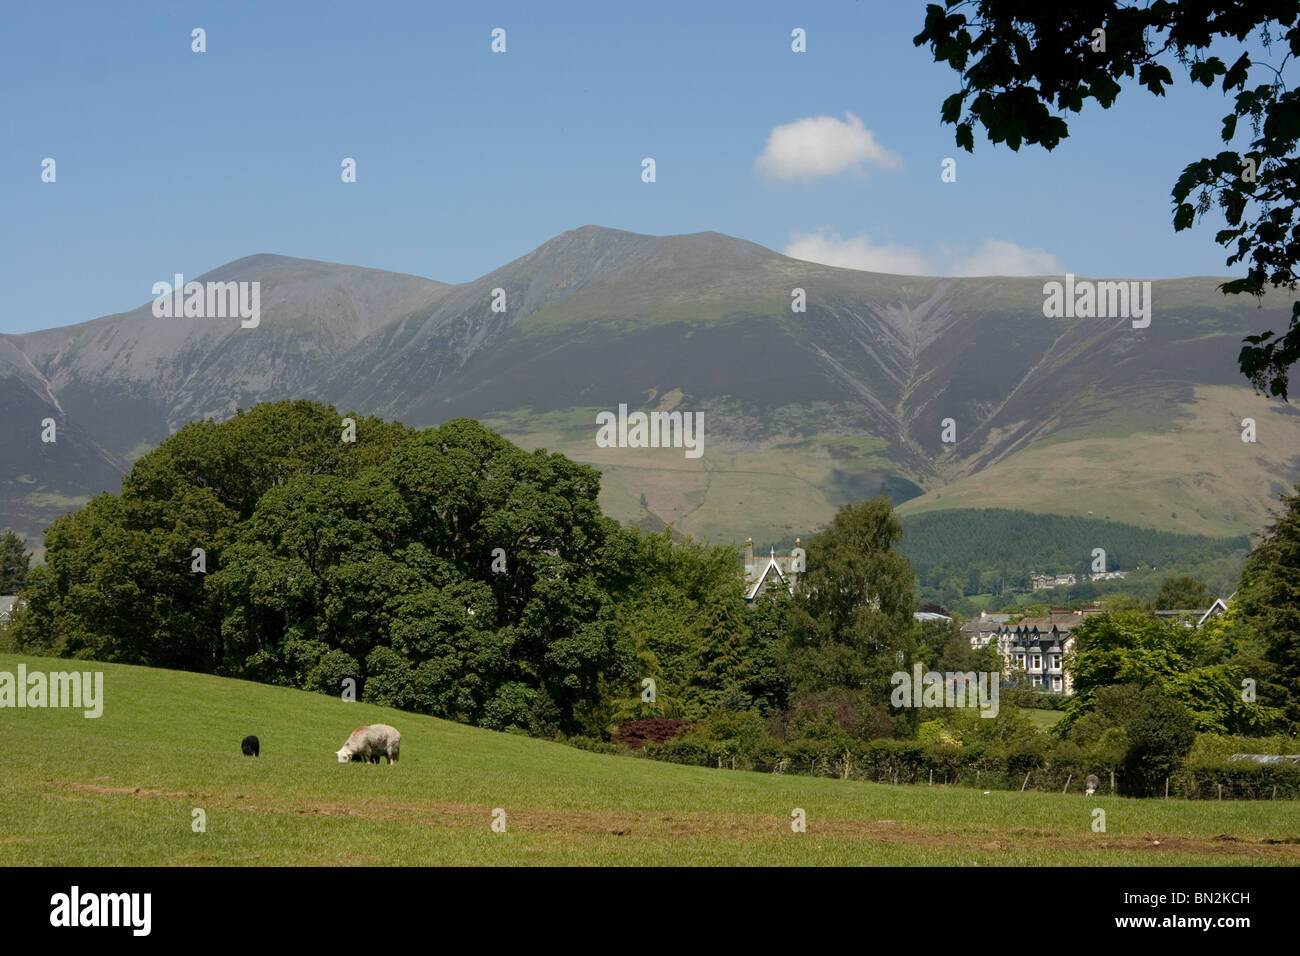 Sheep grazing at Keswick, Cumbria, with high fells (mountains) in background Stock Photo